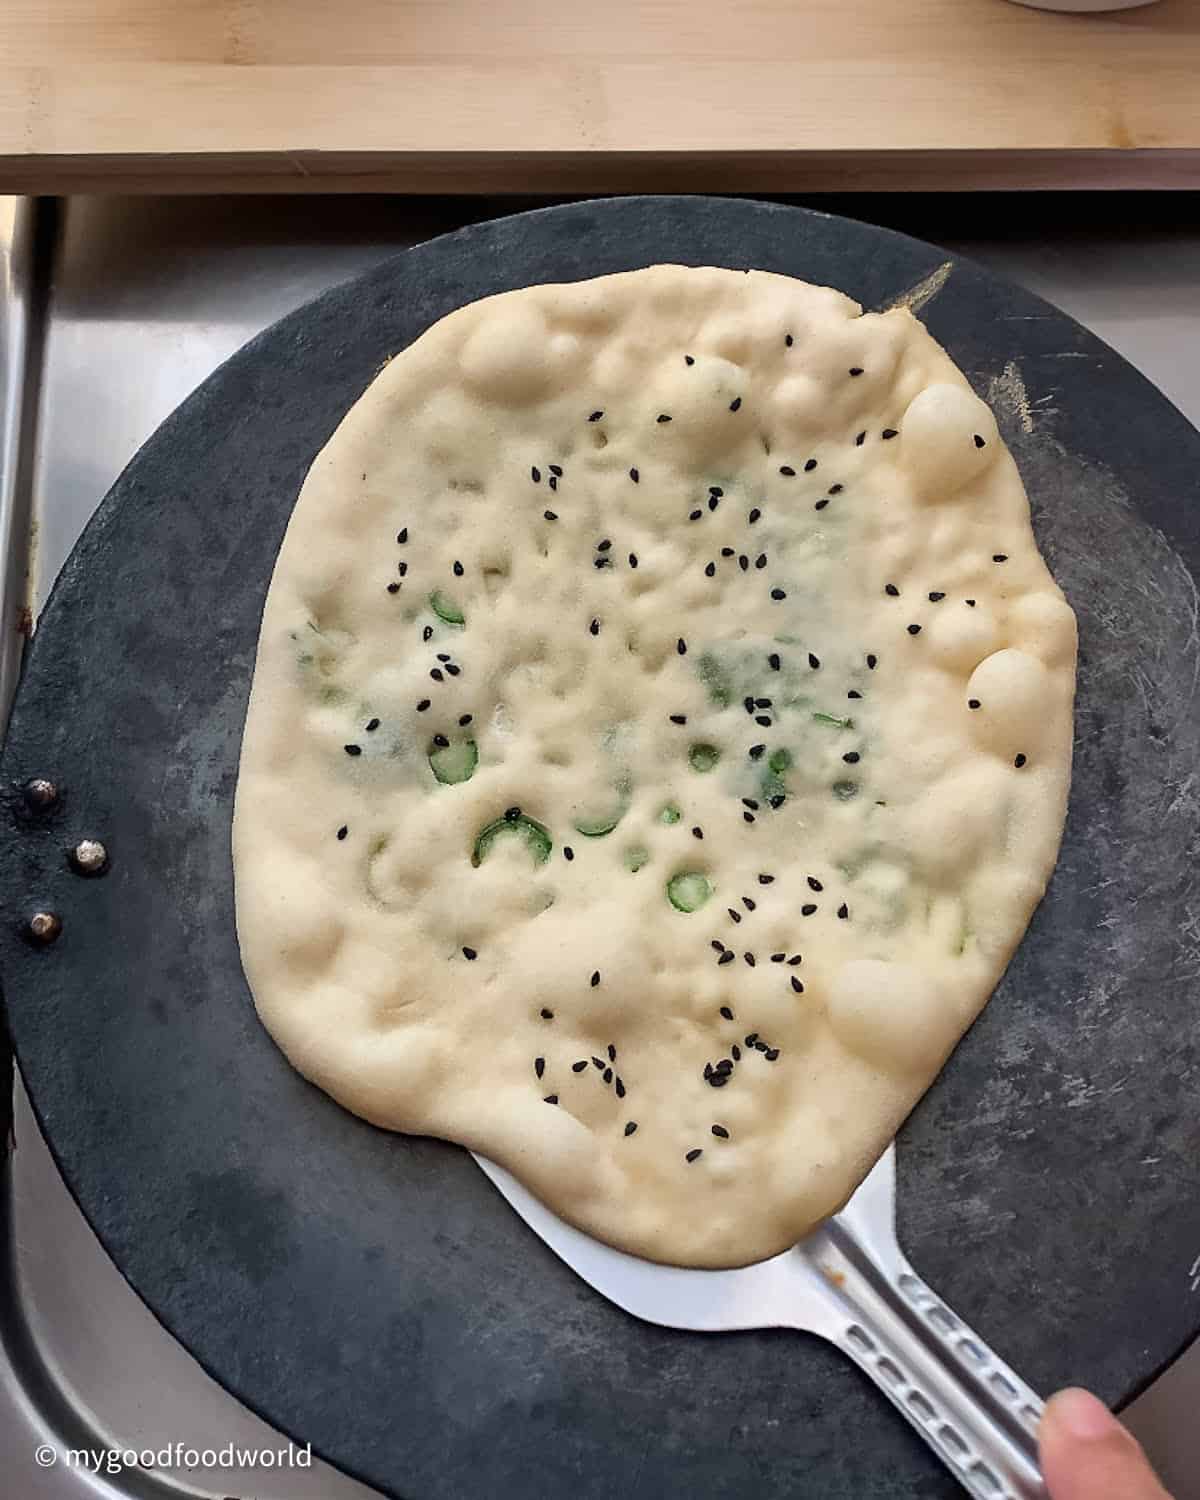 A flatbread is being roasted on a cast iron roasting pan. The bread has bubbles on its surface and a metal spatula is being slid under the bread.